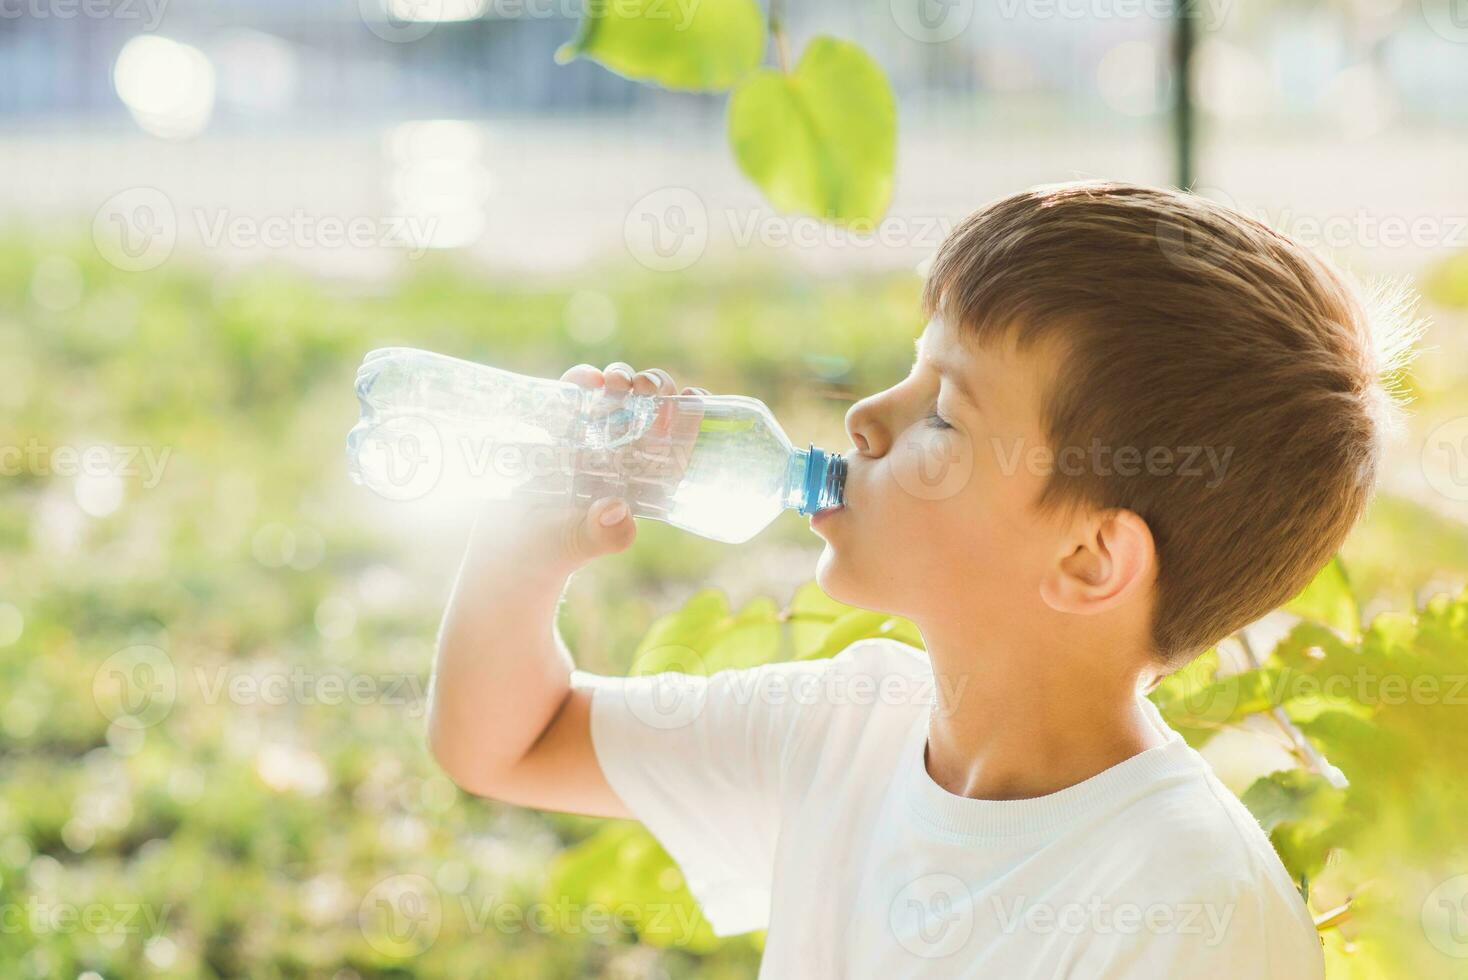 Cute boy sitting on the grass drinks water from a bottle in the summer at sunset. Child quenches thirst on a hot day photo